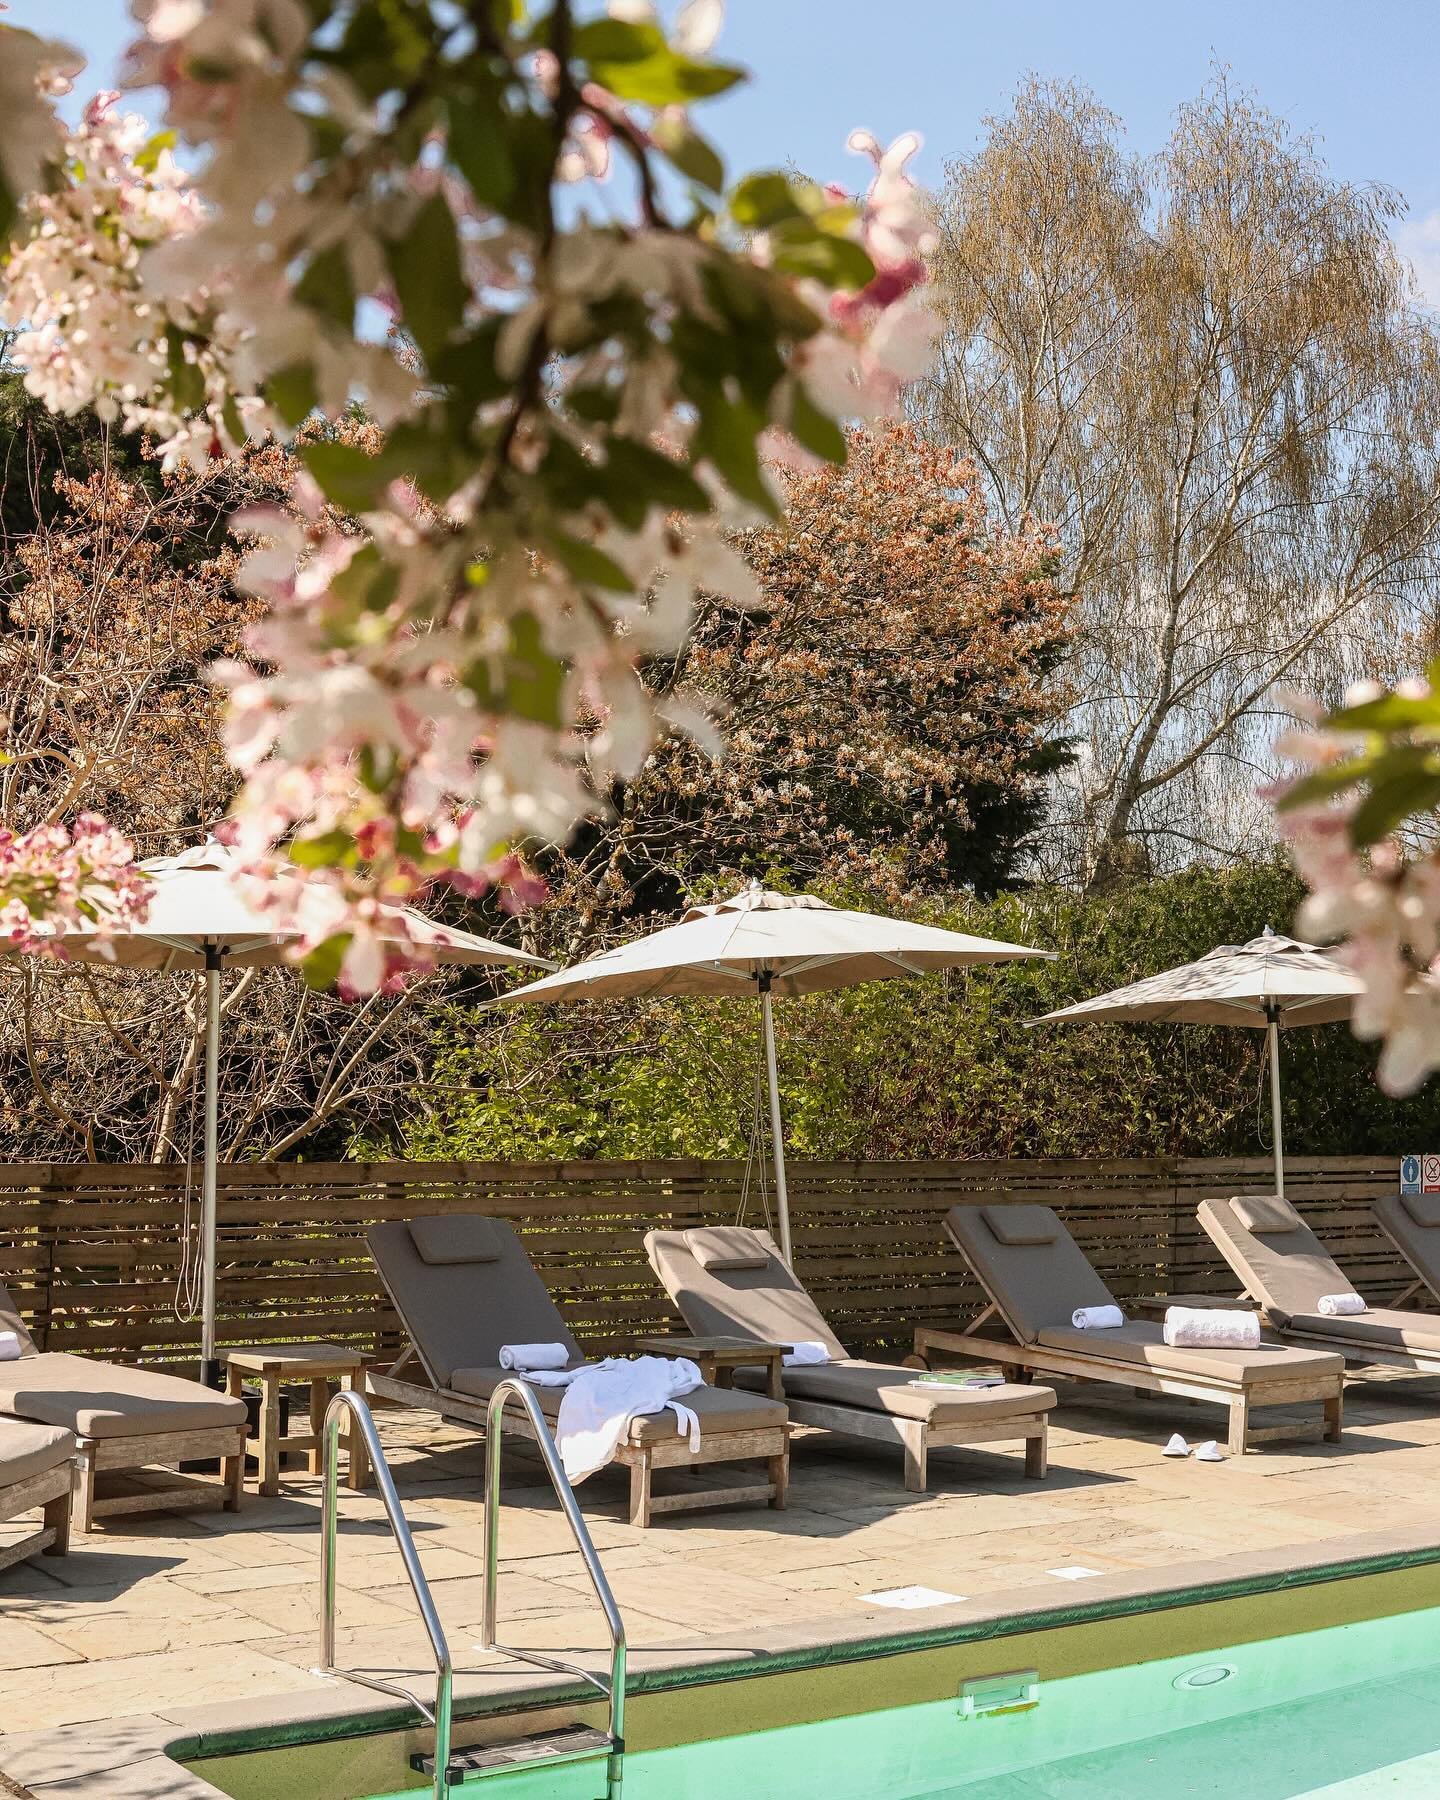 Fancy a dip? 

@thebathpriory pool is officially open for the season! Whether you&rsquo;re planning on lounging in luxury or taking a refreshing dip, unwind and bask in the beauty of the season.

Plan your summer getaway today - link in bio 🔗